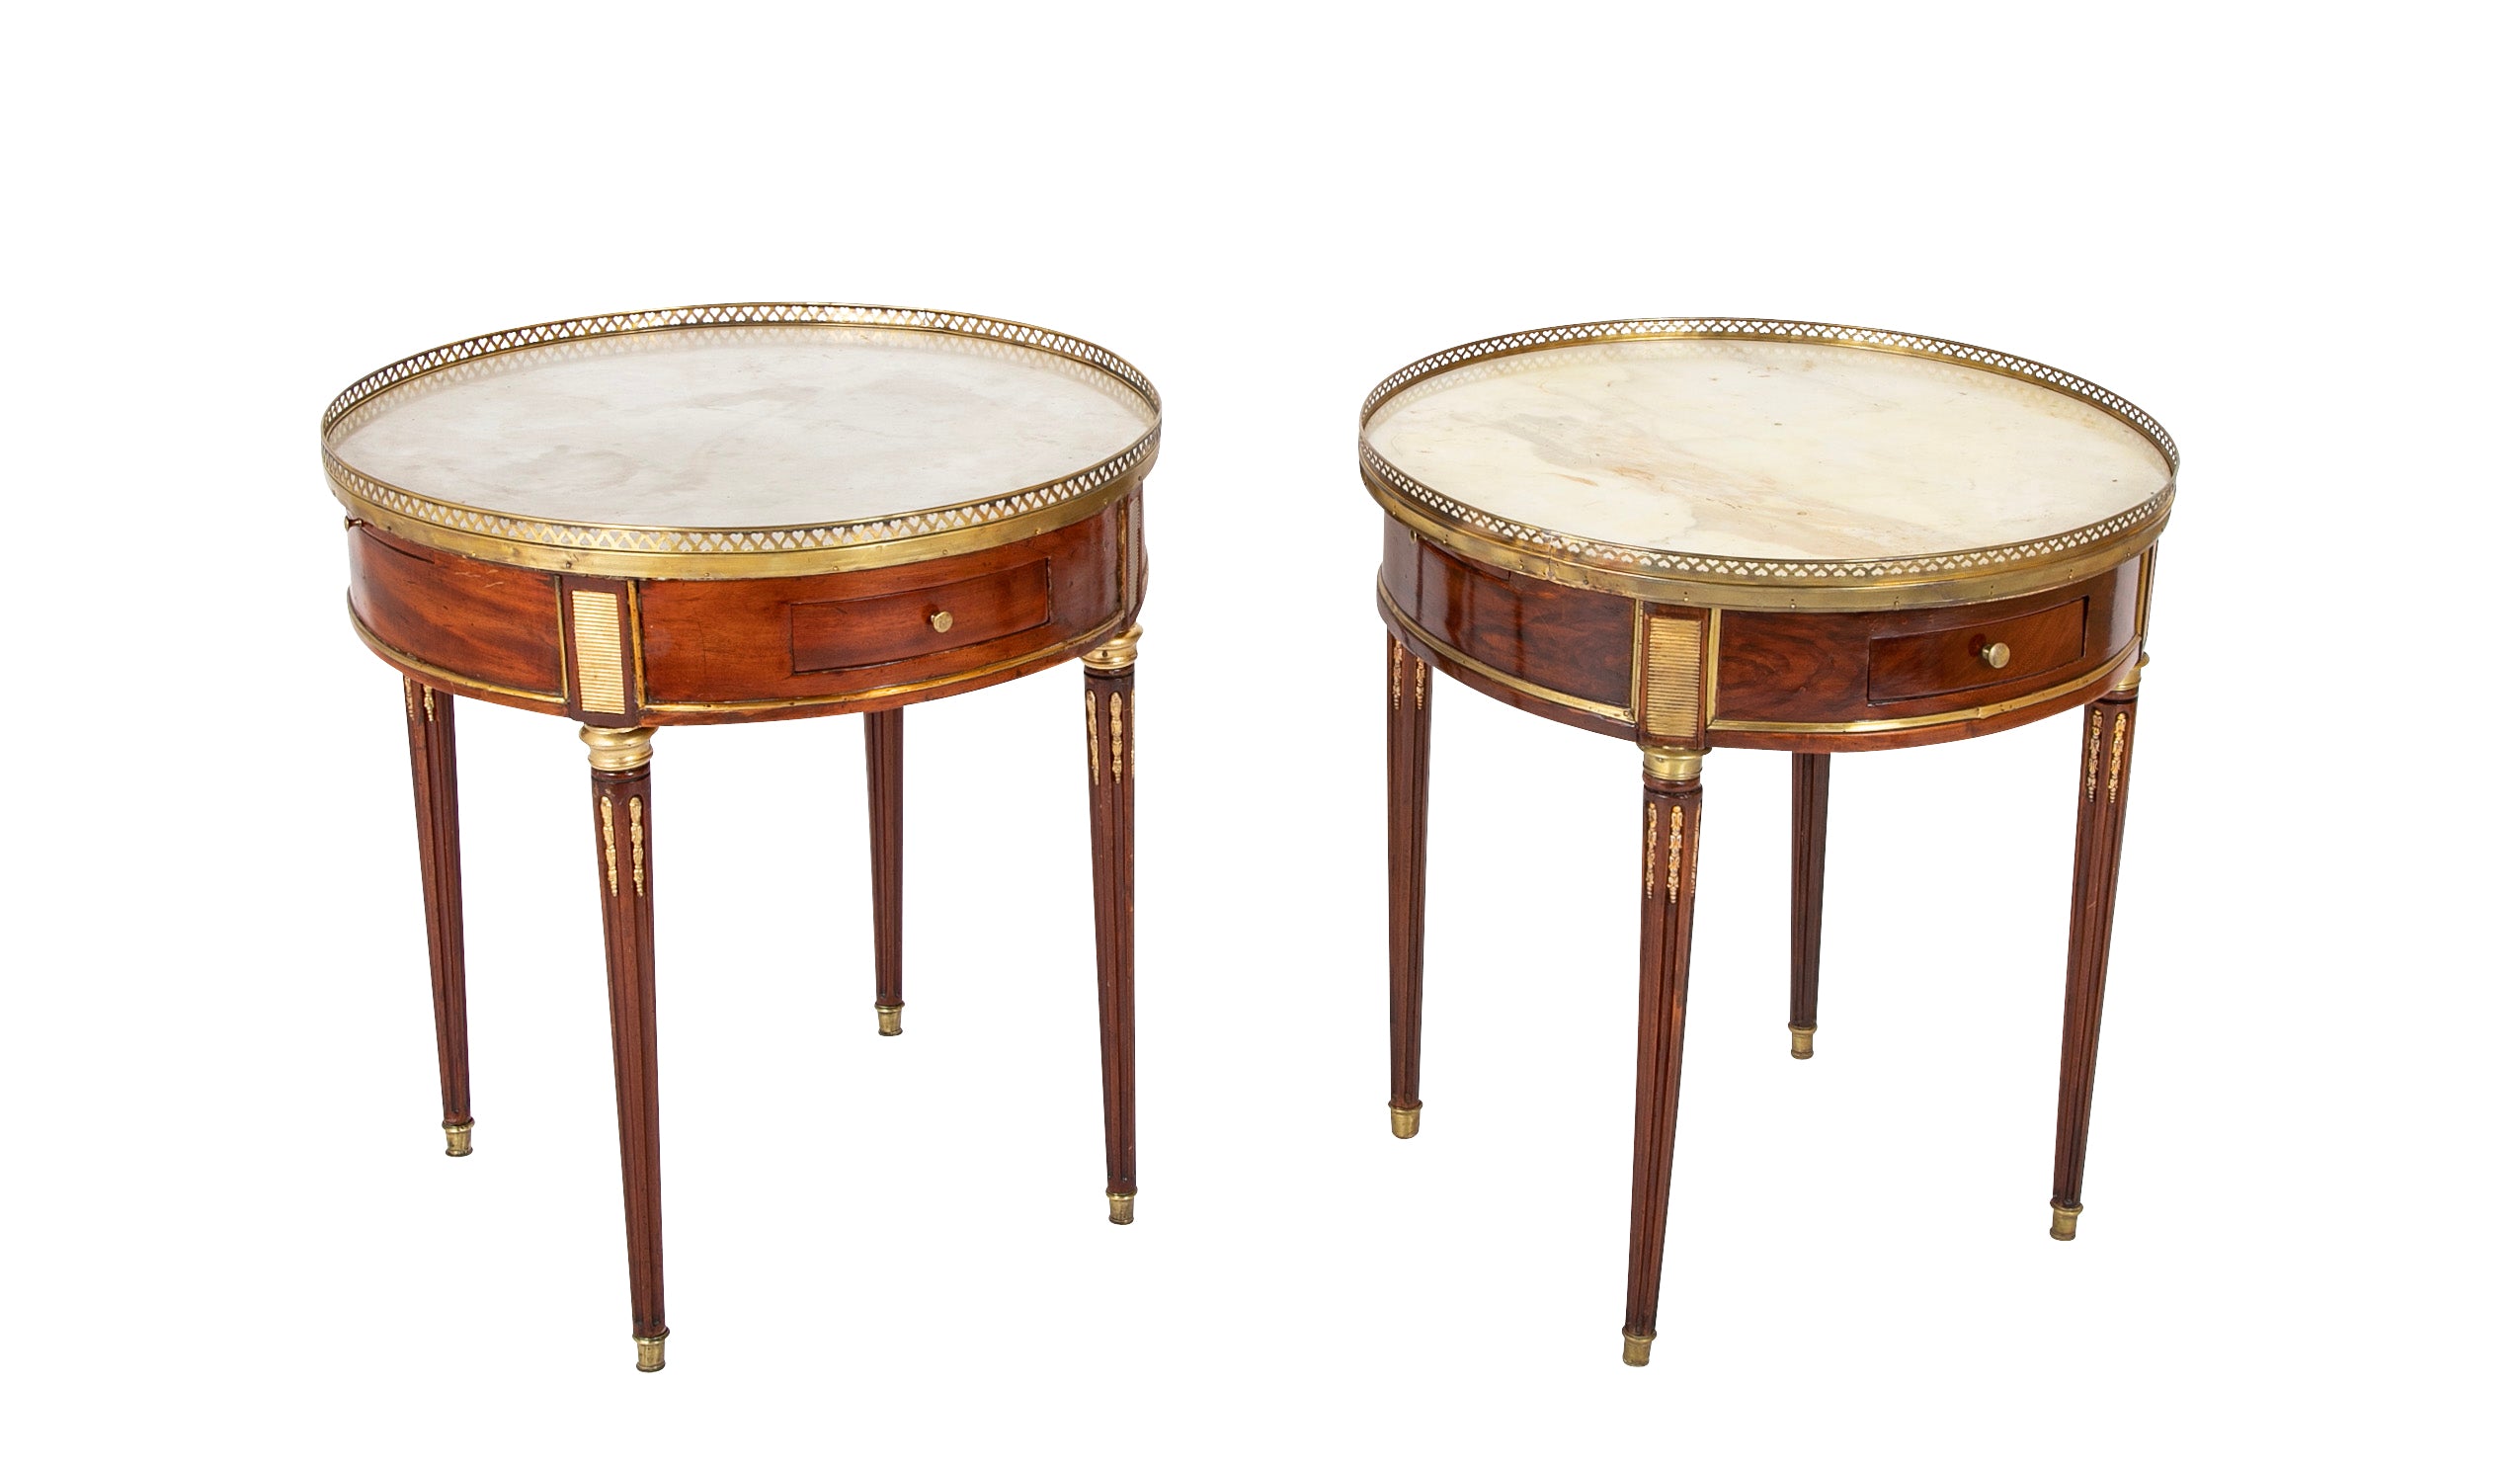 Late 18th Century Matched Pair of Louis XVI Marble Top Bouillotte Tables with Slides & Drawers